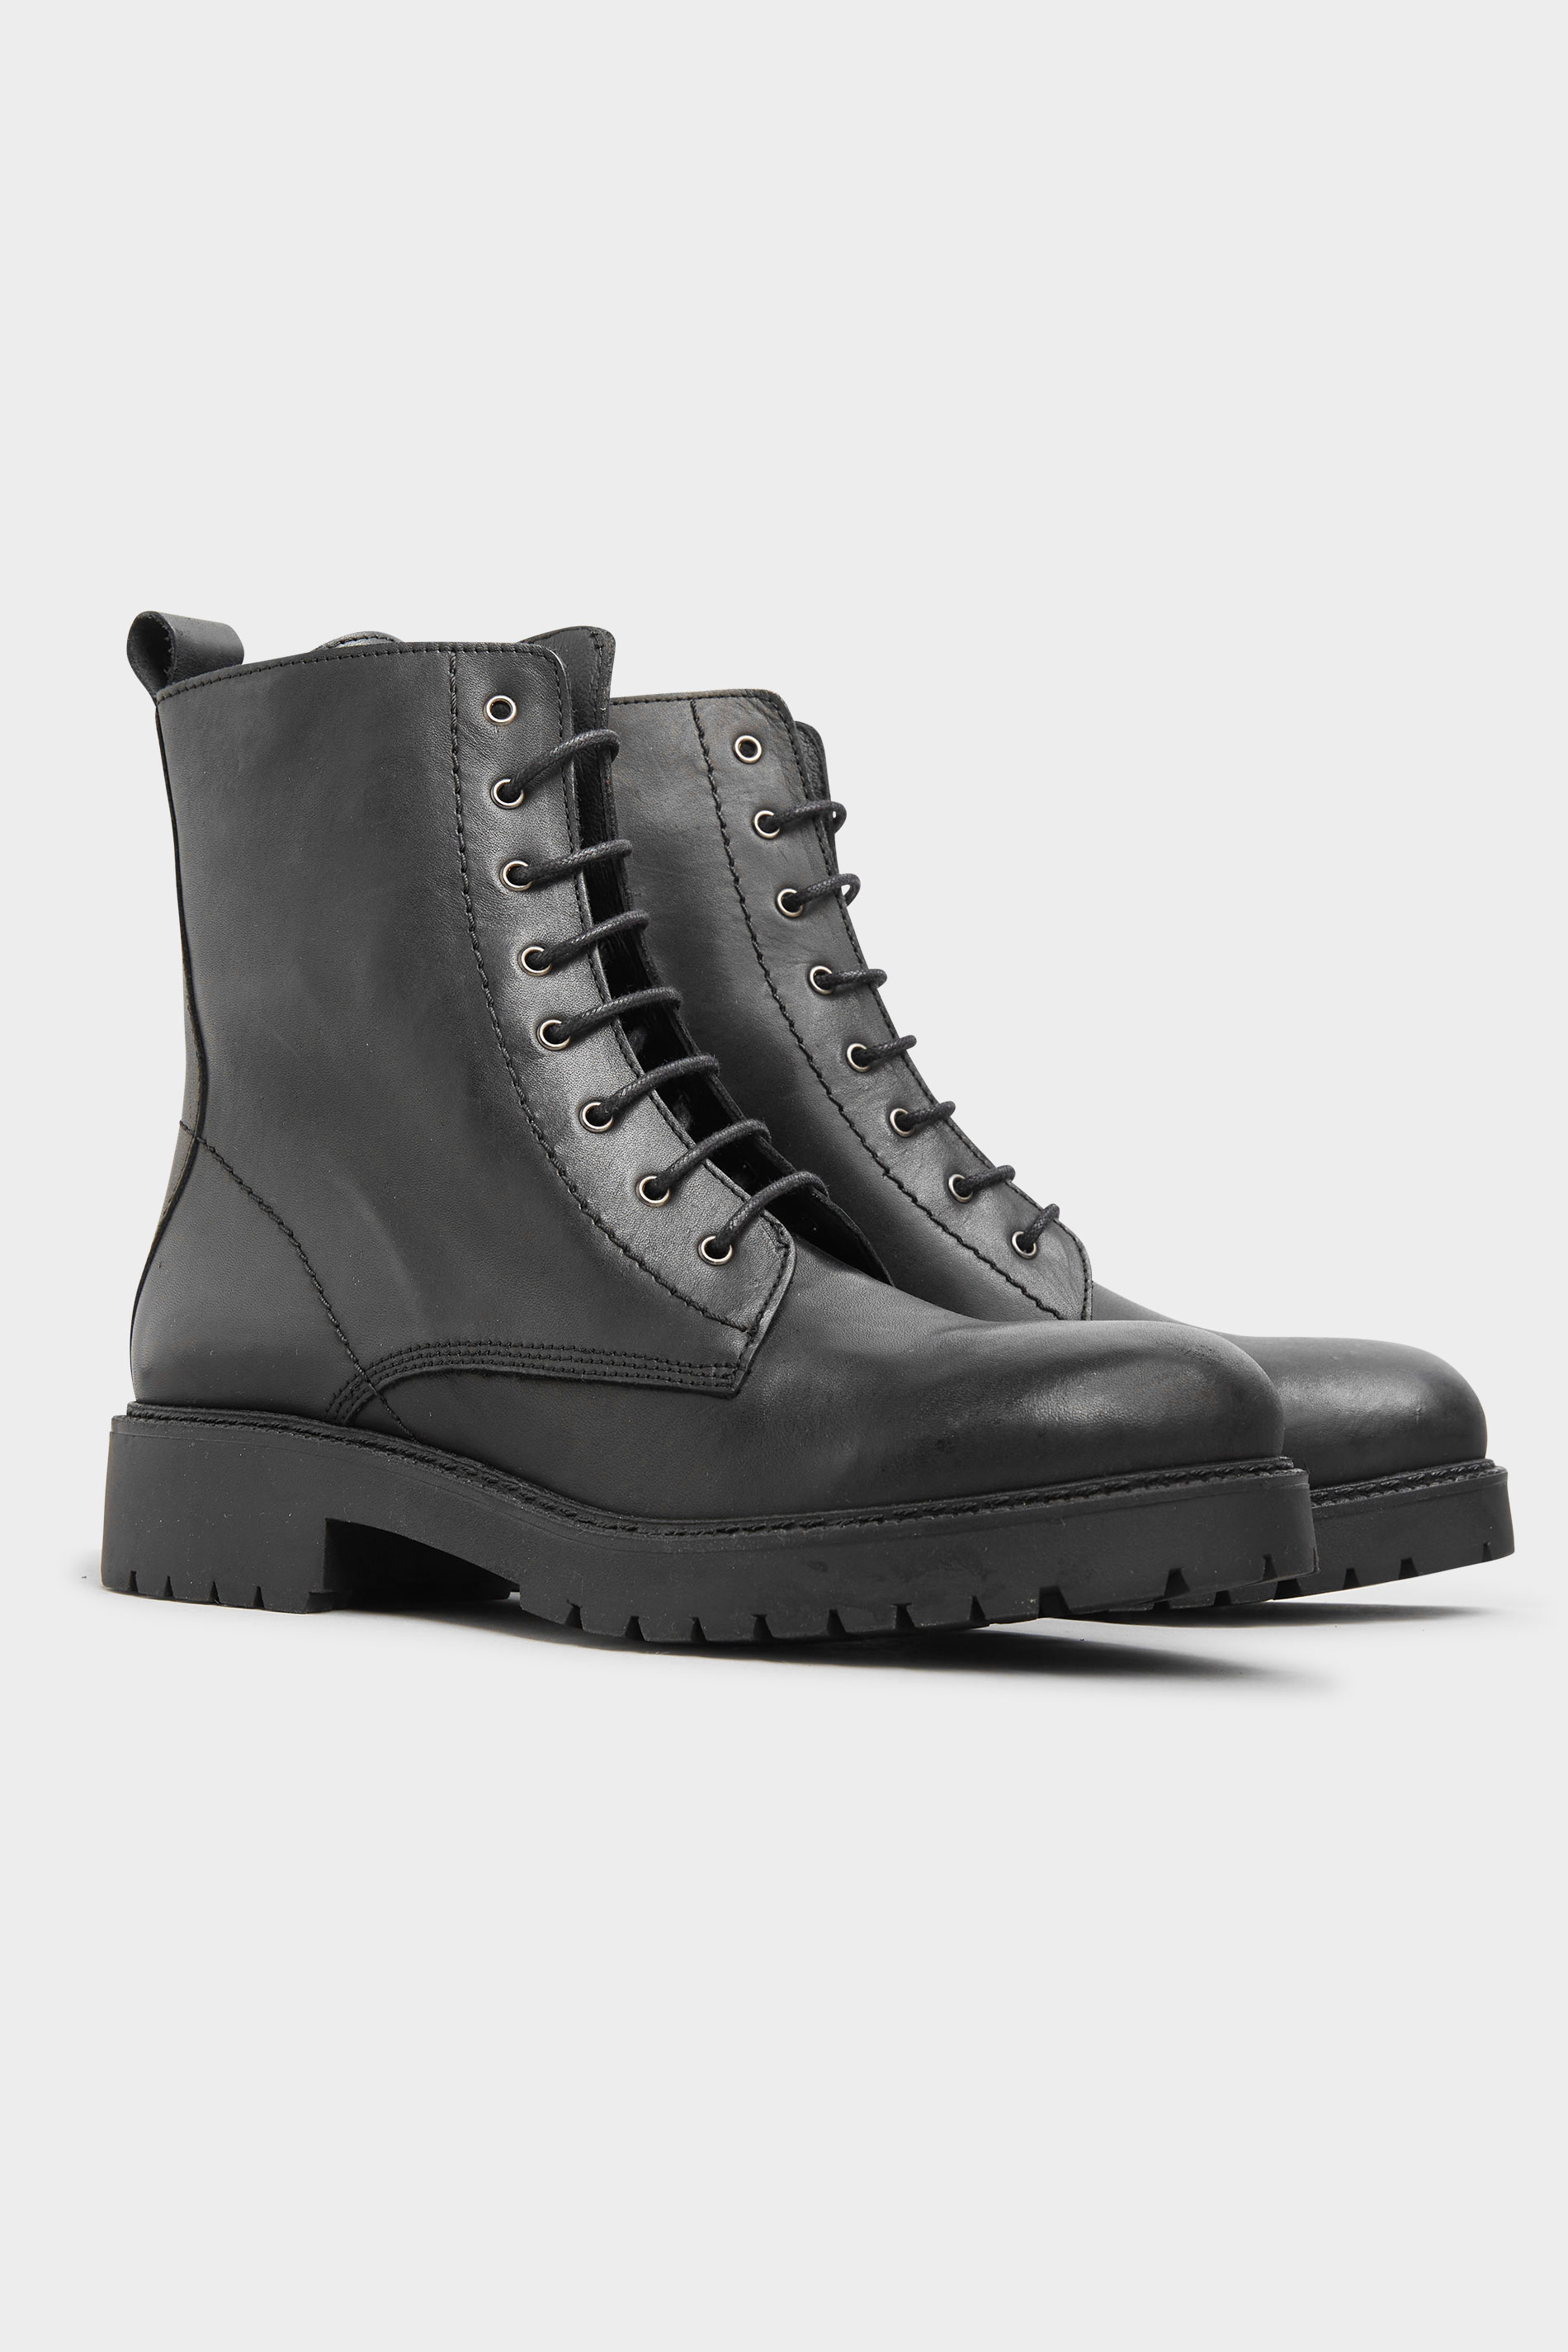 Black Lace Up Leather Boots | Long Tall Sally  1